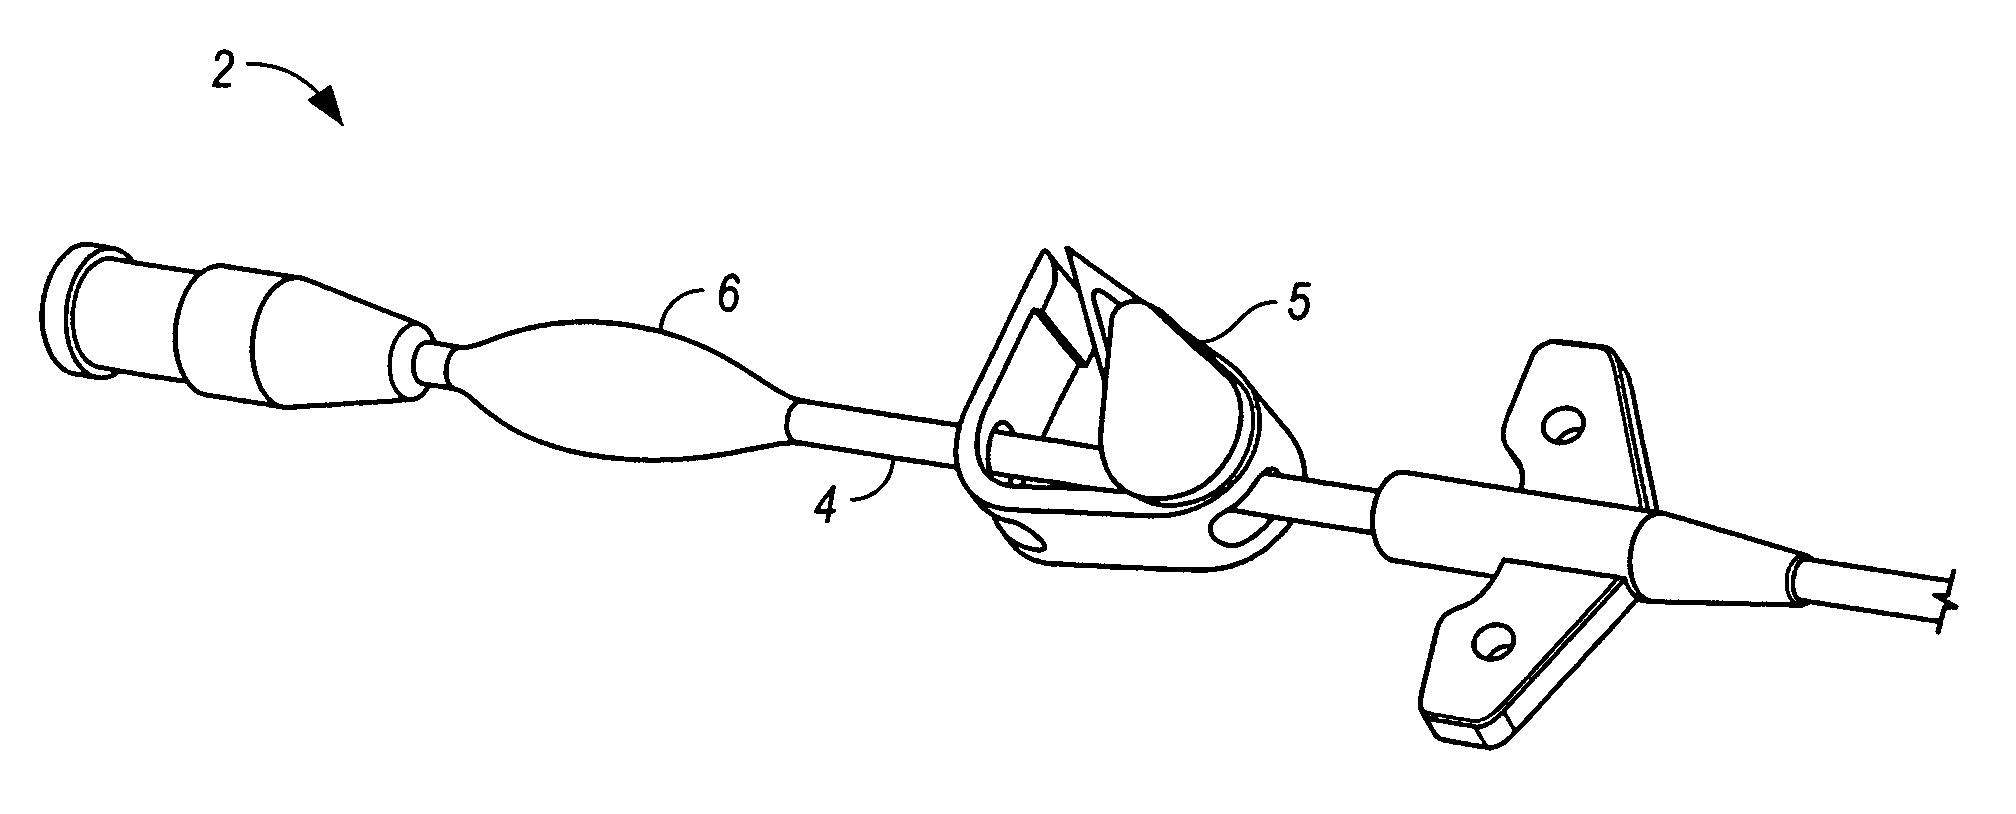 Power injection catheters and method of injecting